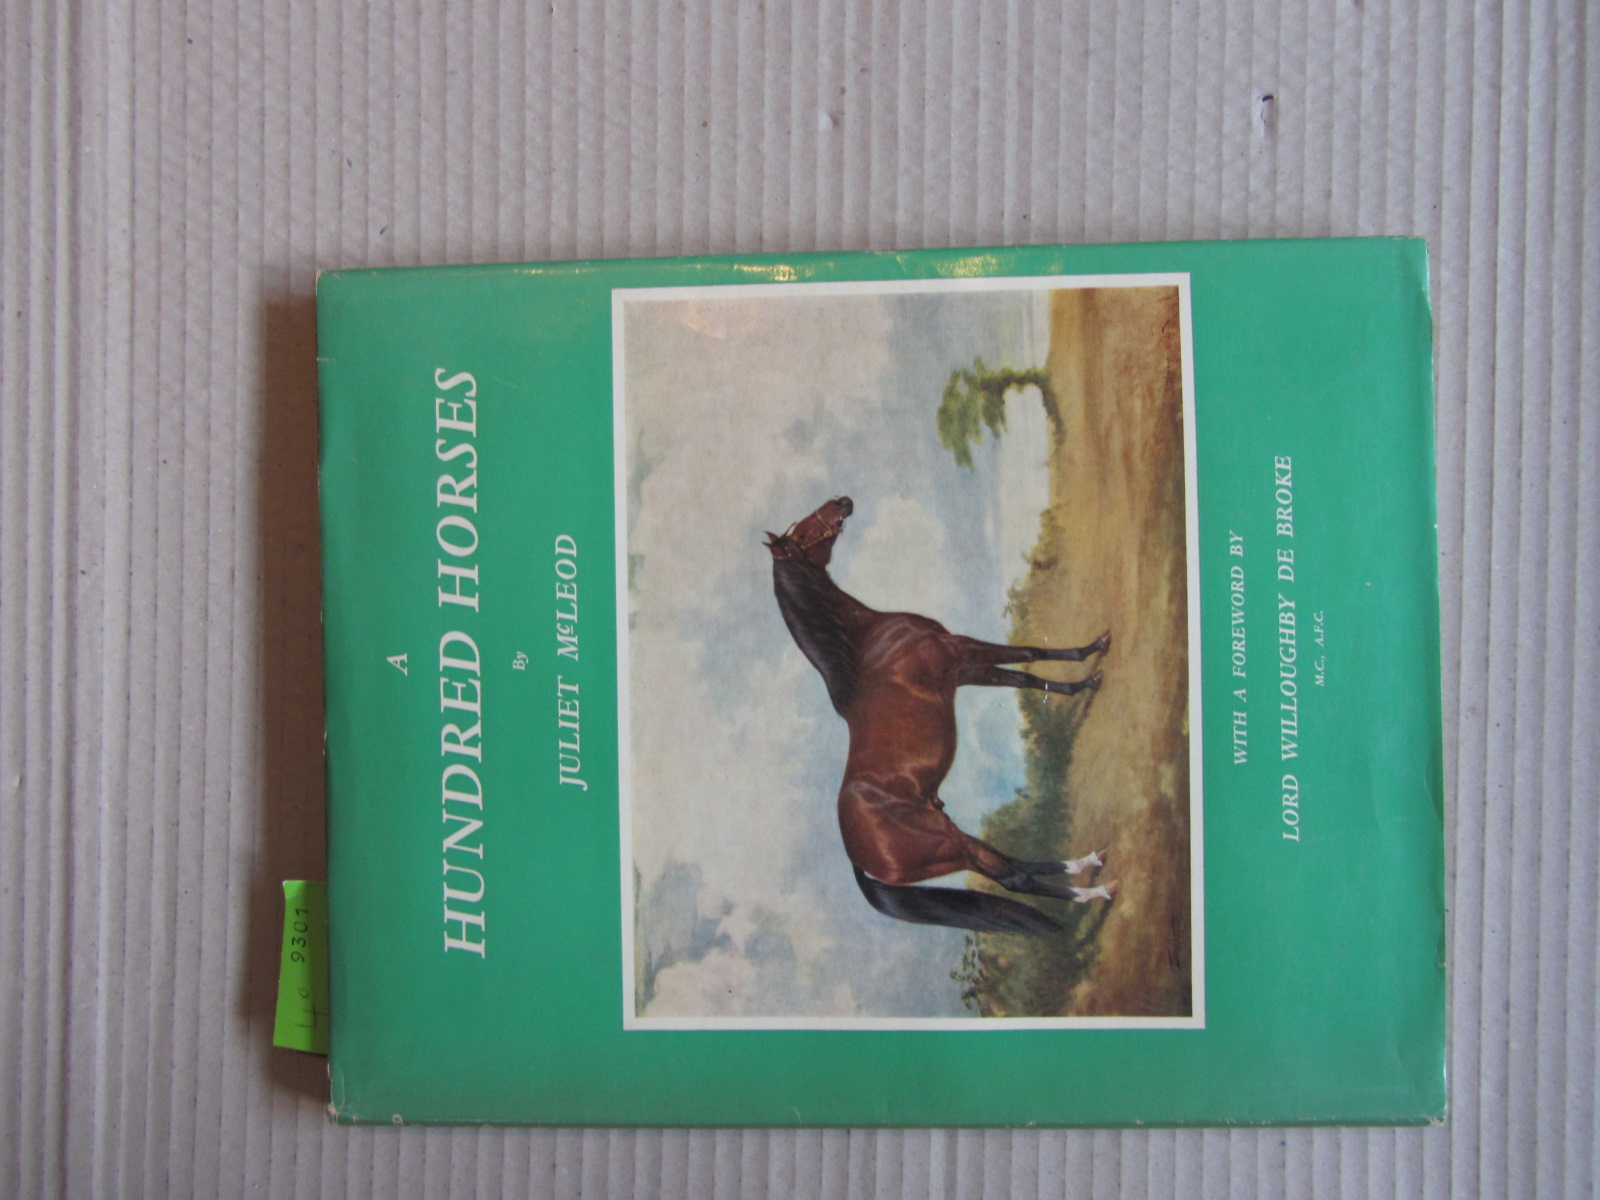 McLeod, Juliet:  A Hundred Horses with a foreword by Lord Willoughby de Broke. 